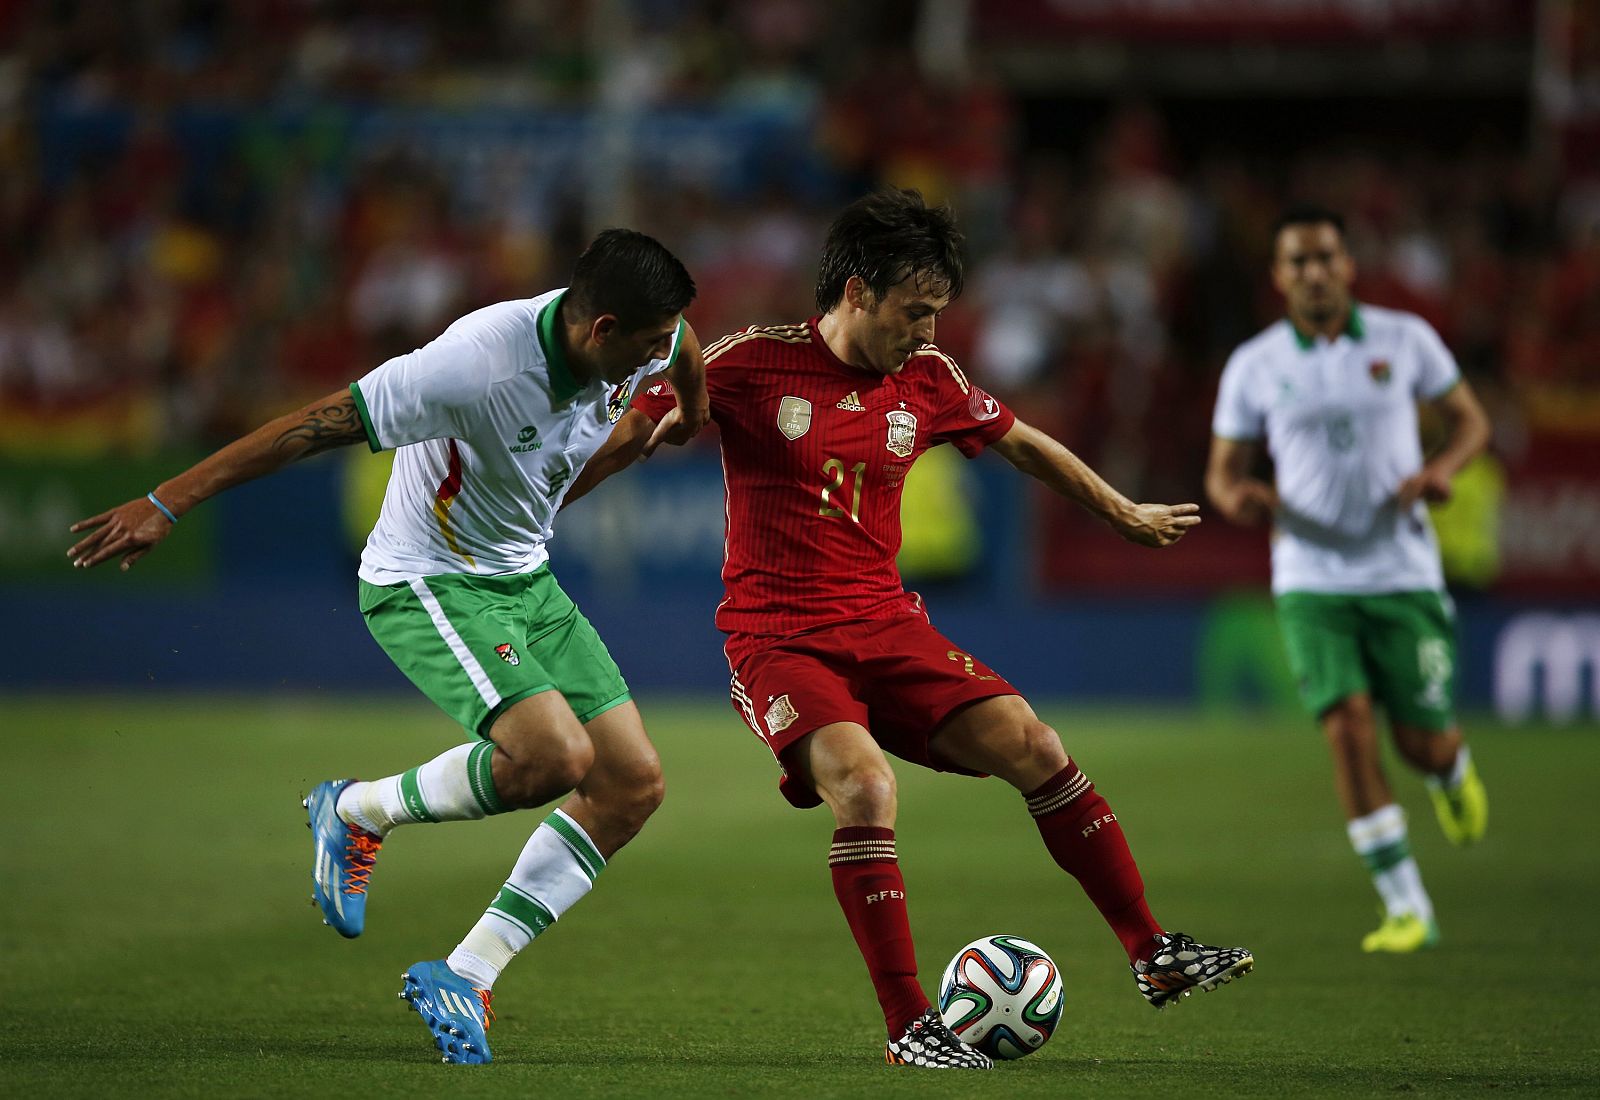 Spain's Silva is challenged by Bolivia's Eguino during their international friendly soccer match in Seville